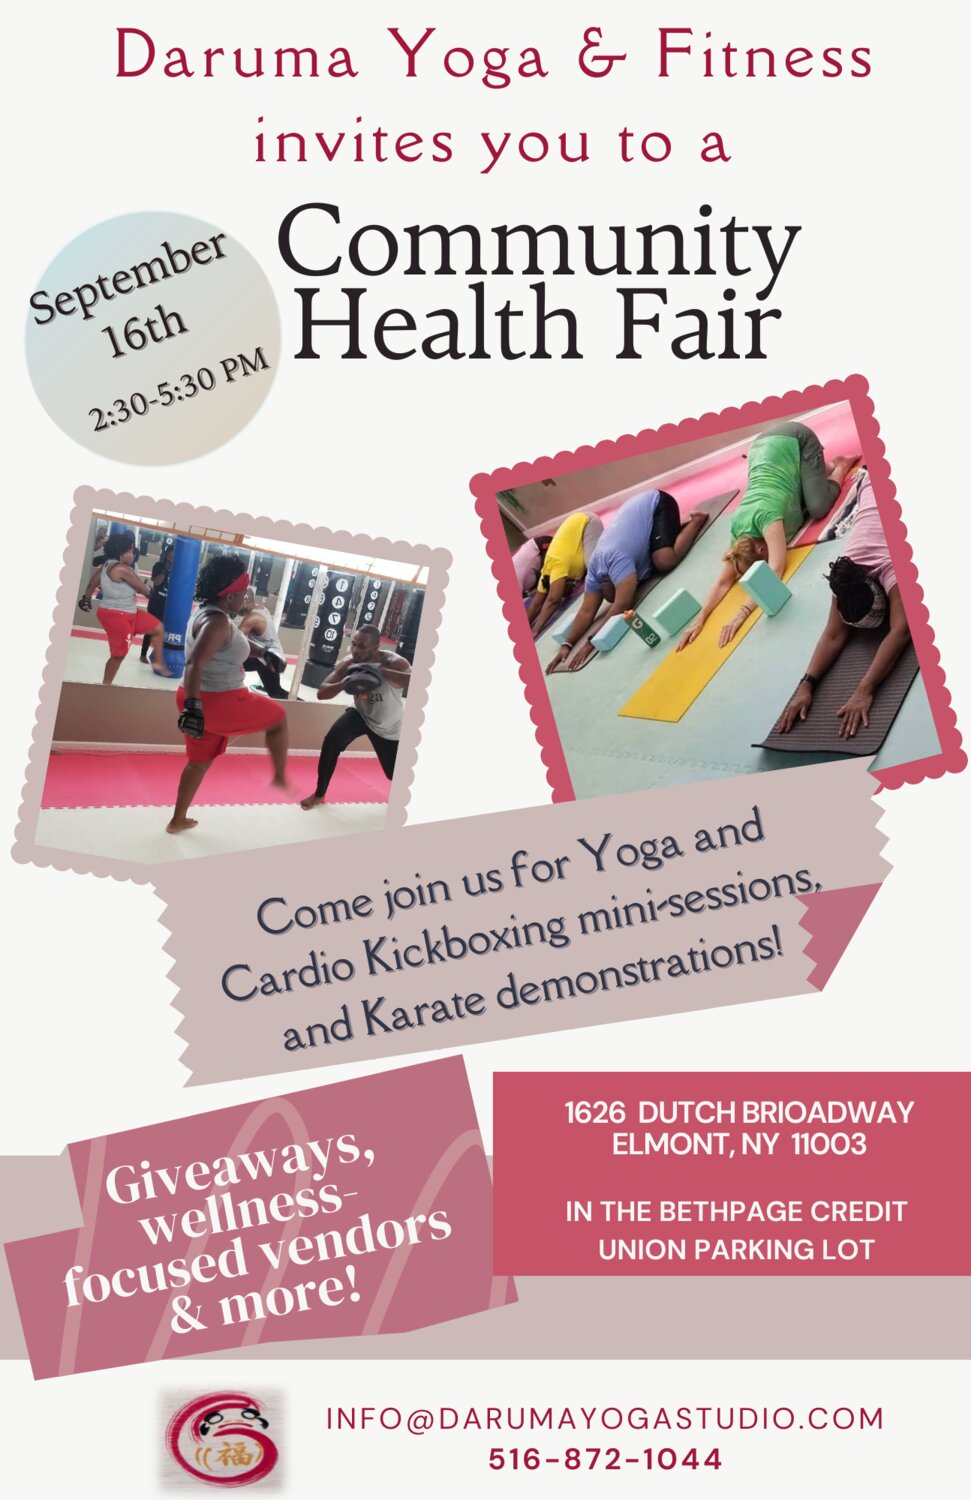 Neighbors are welcome to learn a bit more about preventative health measures at the community health fair sponsored by Daruma Yoga and Fitness.